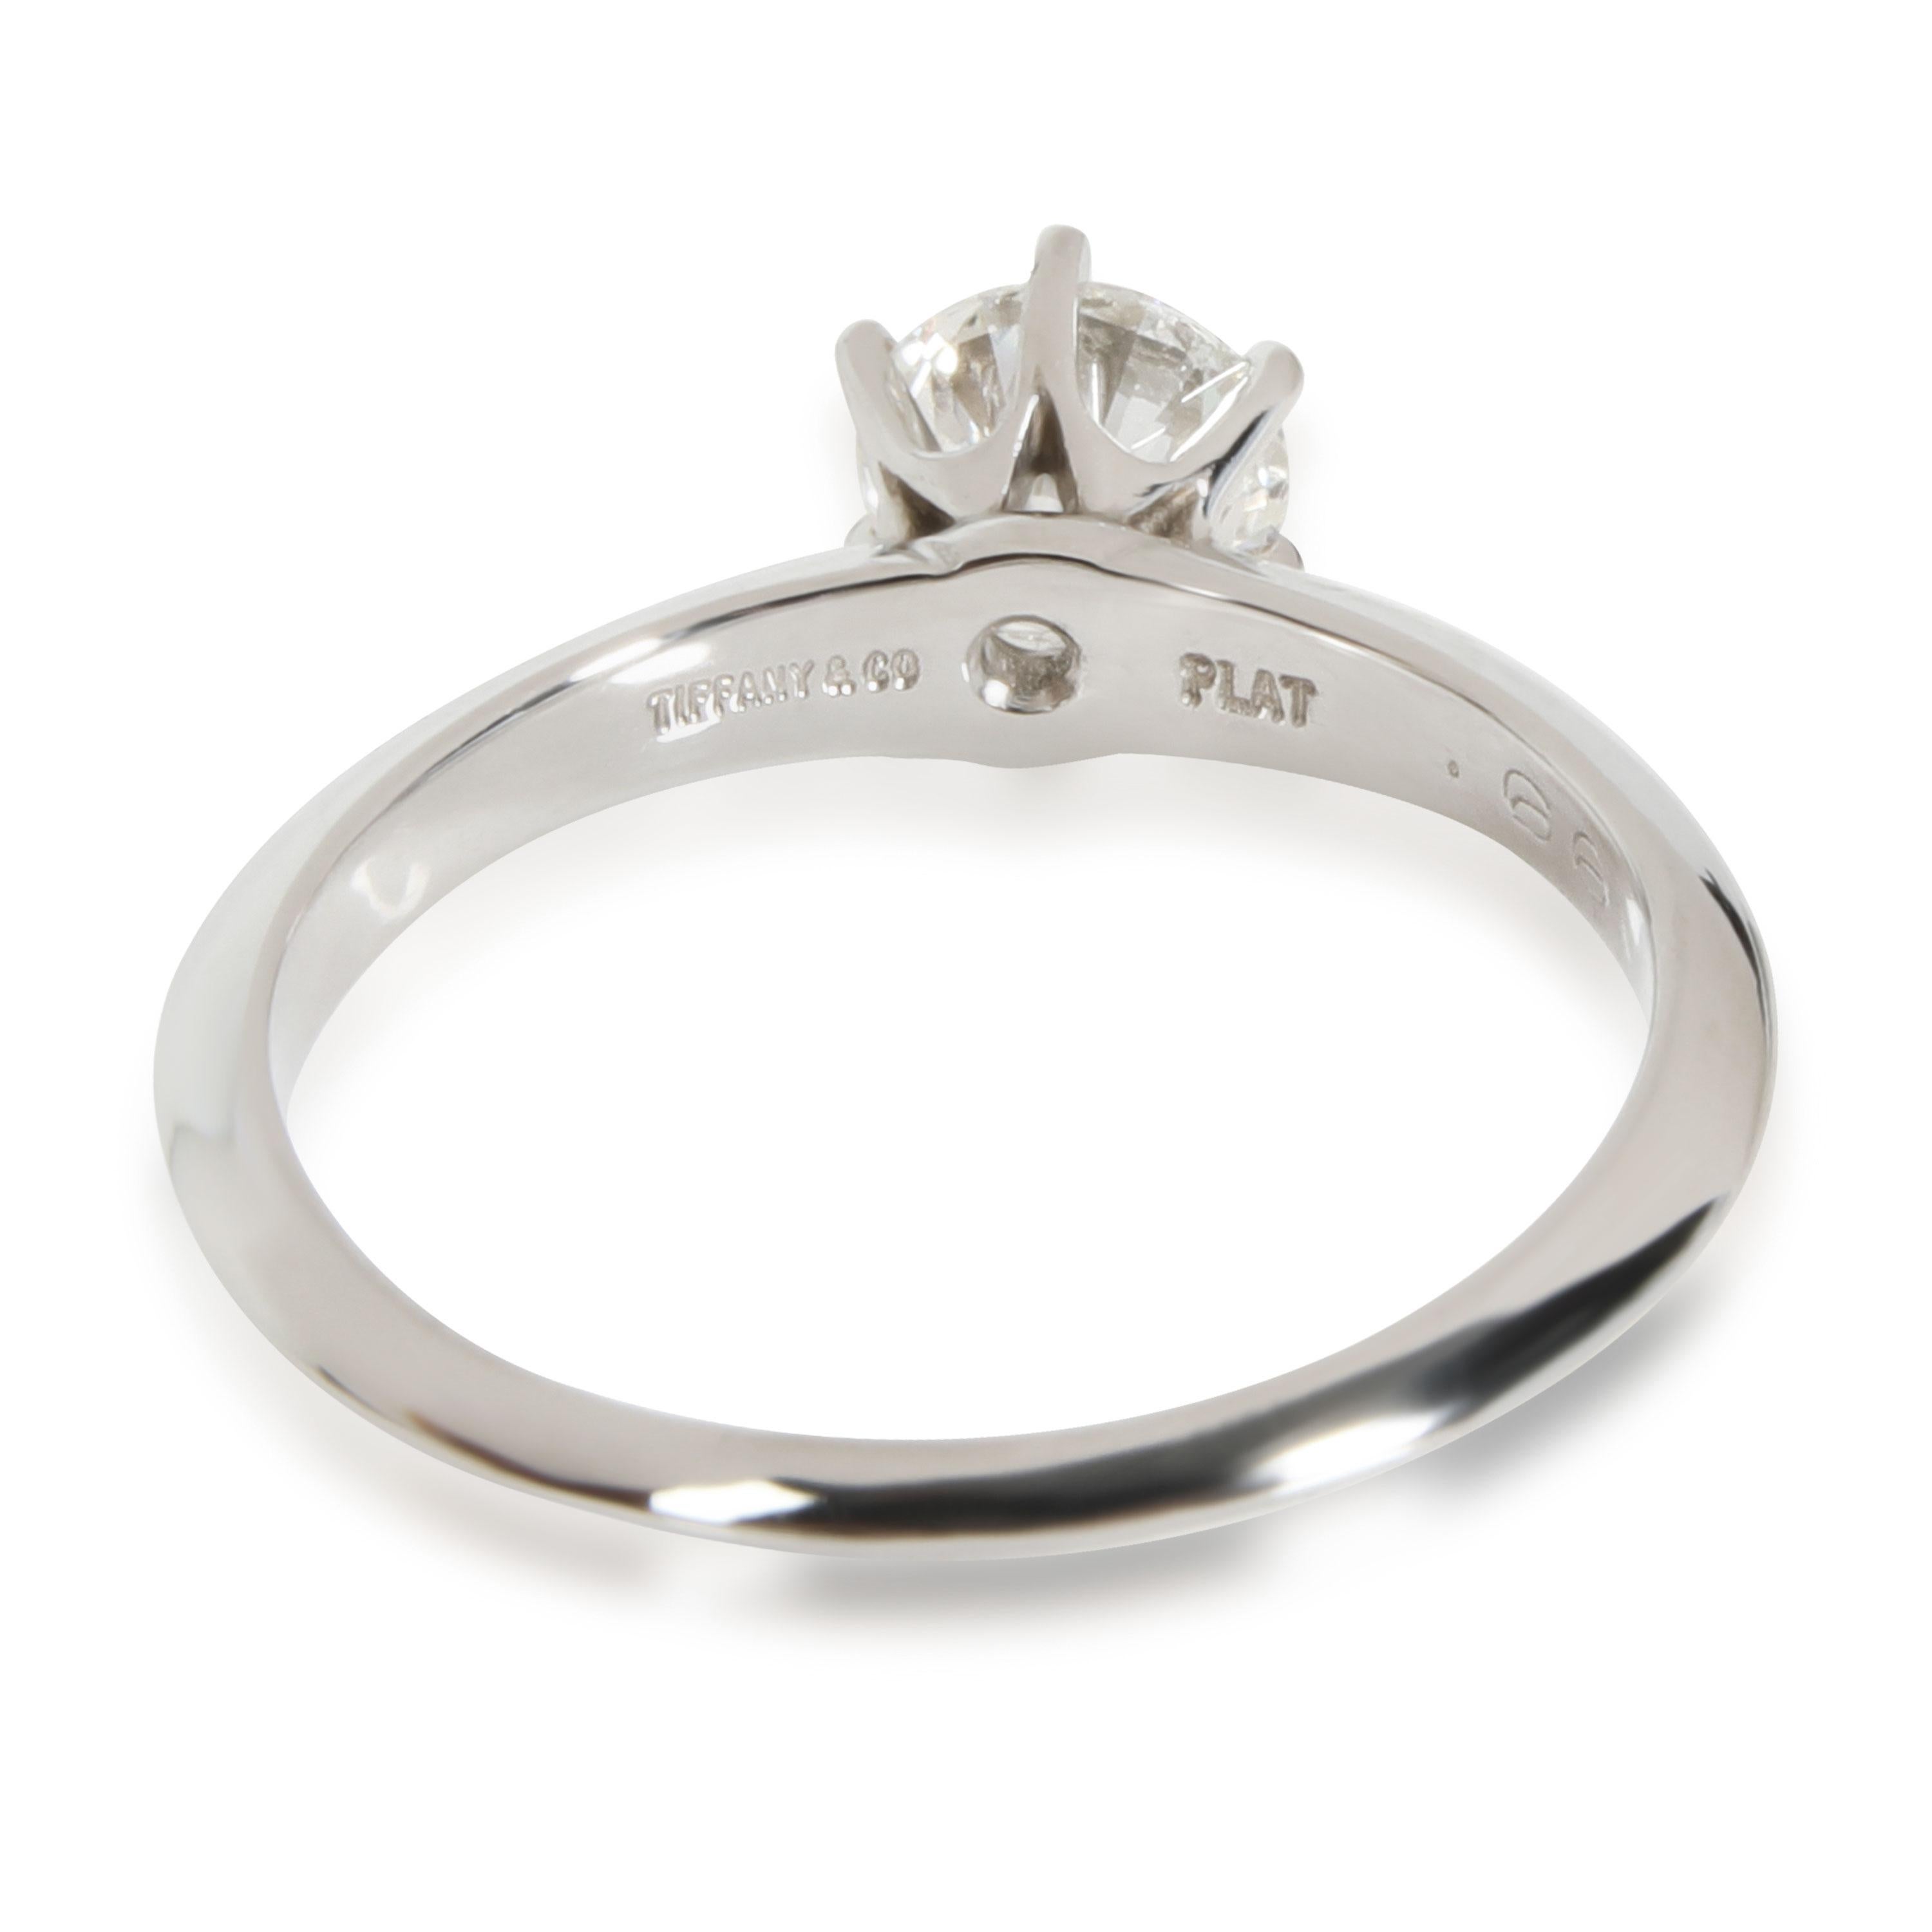 
Tiffany & Co. Diamond Engagement Ring in Platinum Platinum H VS1 0.66 CTW

PRIMARY DETAILS
SKU: 111580
Listing Title: Tiffany & Co. Diamond Engagement Ring in Platinum Platinum H VS1 0.66 CTW
Condition Description: Retails for 6,700 USD. In